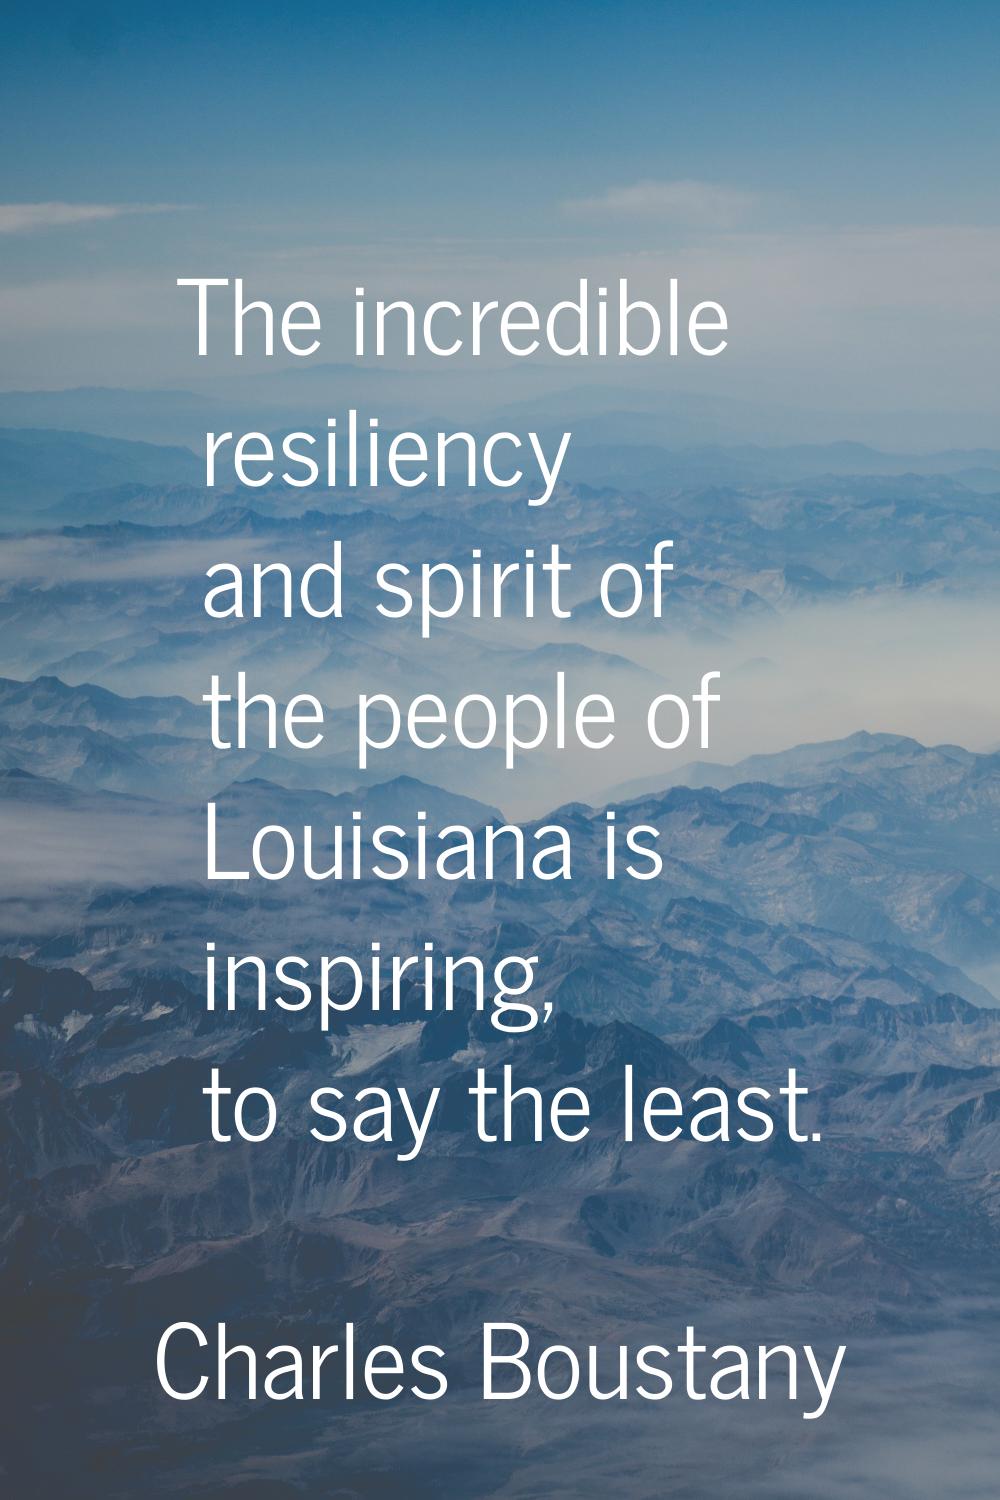 The incredible resiliency and spirit of the people of Louisiana is inspiring, to say the least.